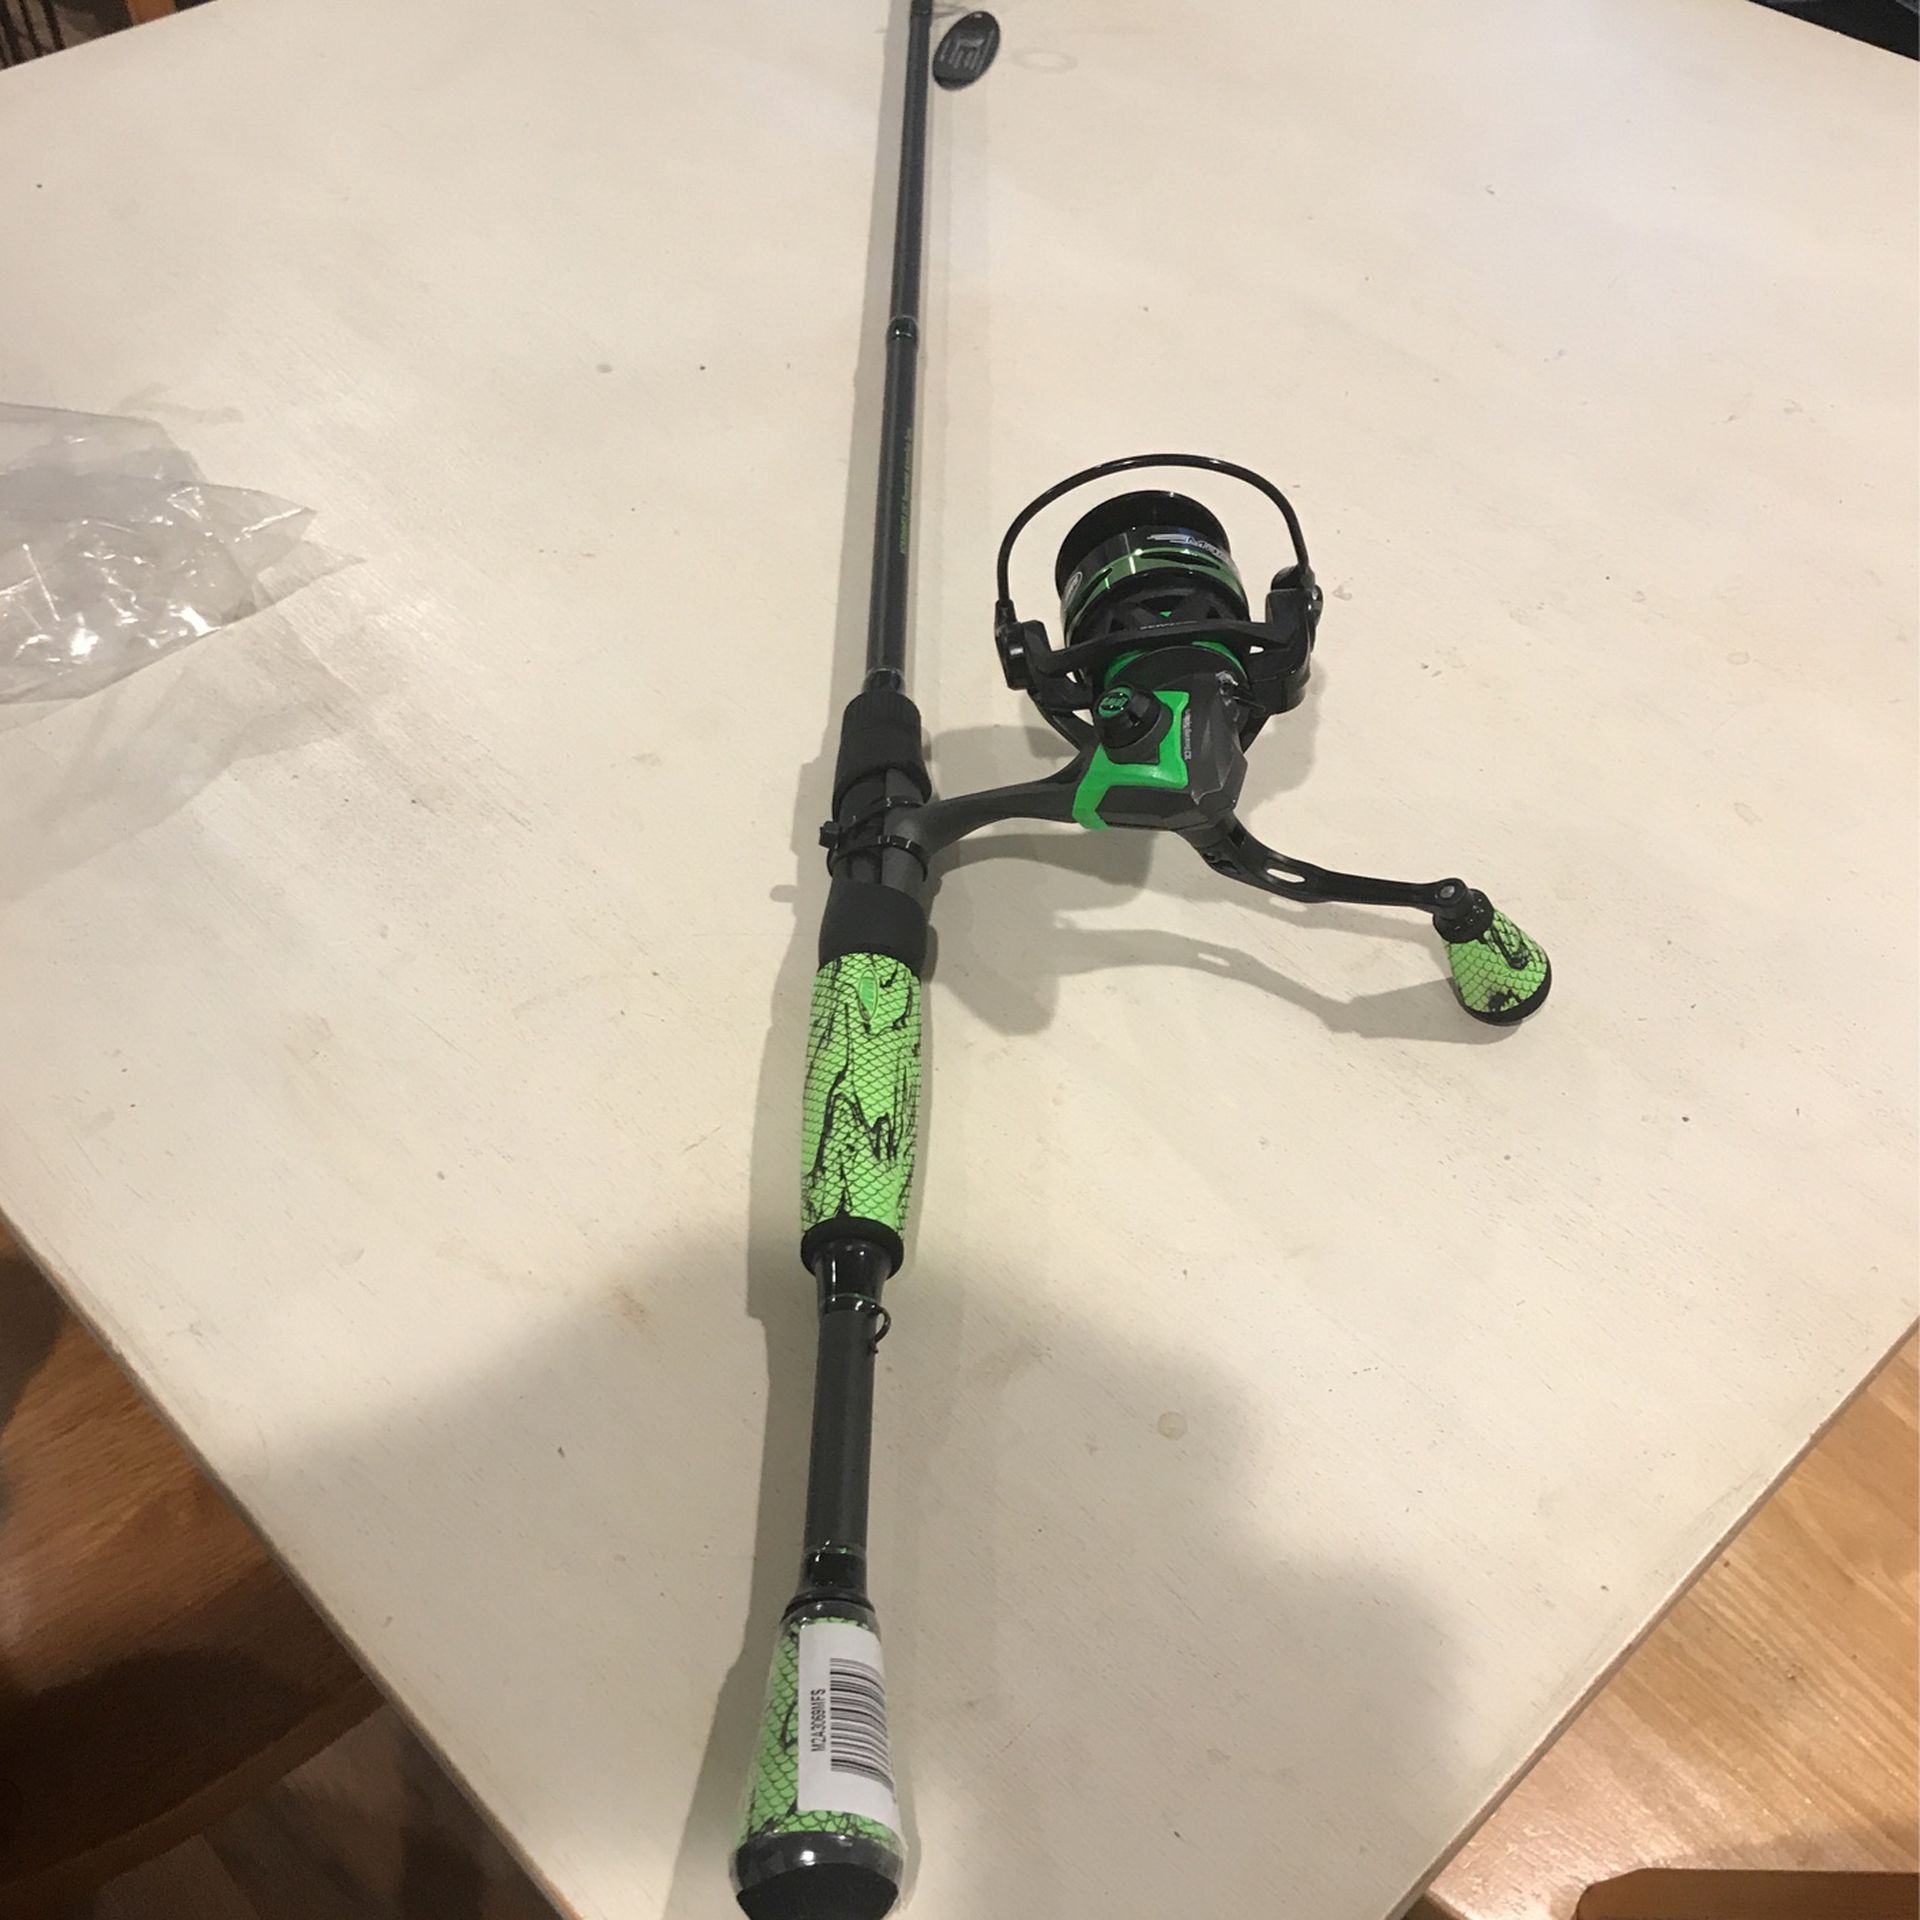 NEW LEWS Mach 2 Spinning Reel for Sale in Townville, SC - OfferUp